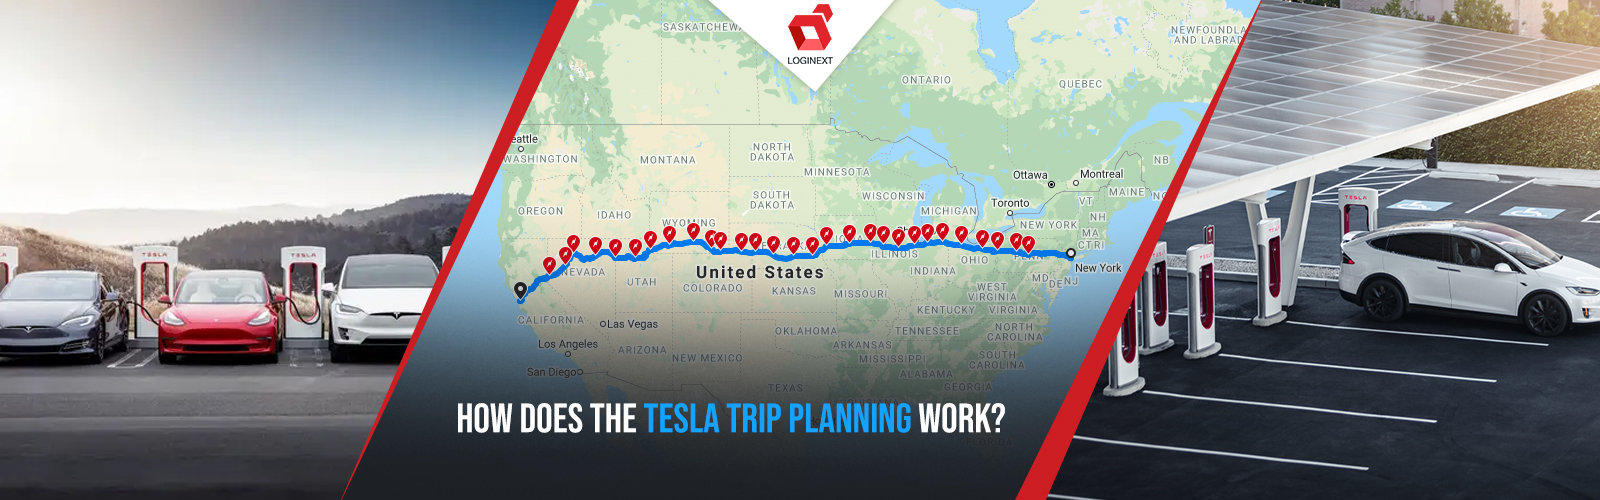 How does the Tesla Trip Planning Work?